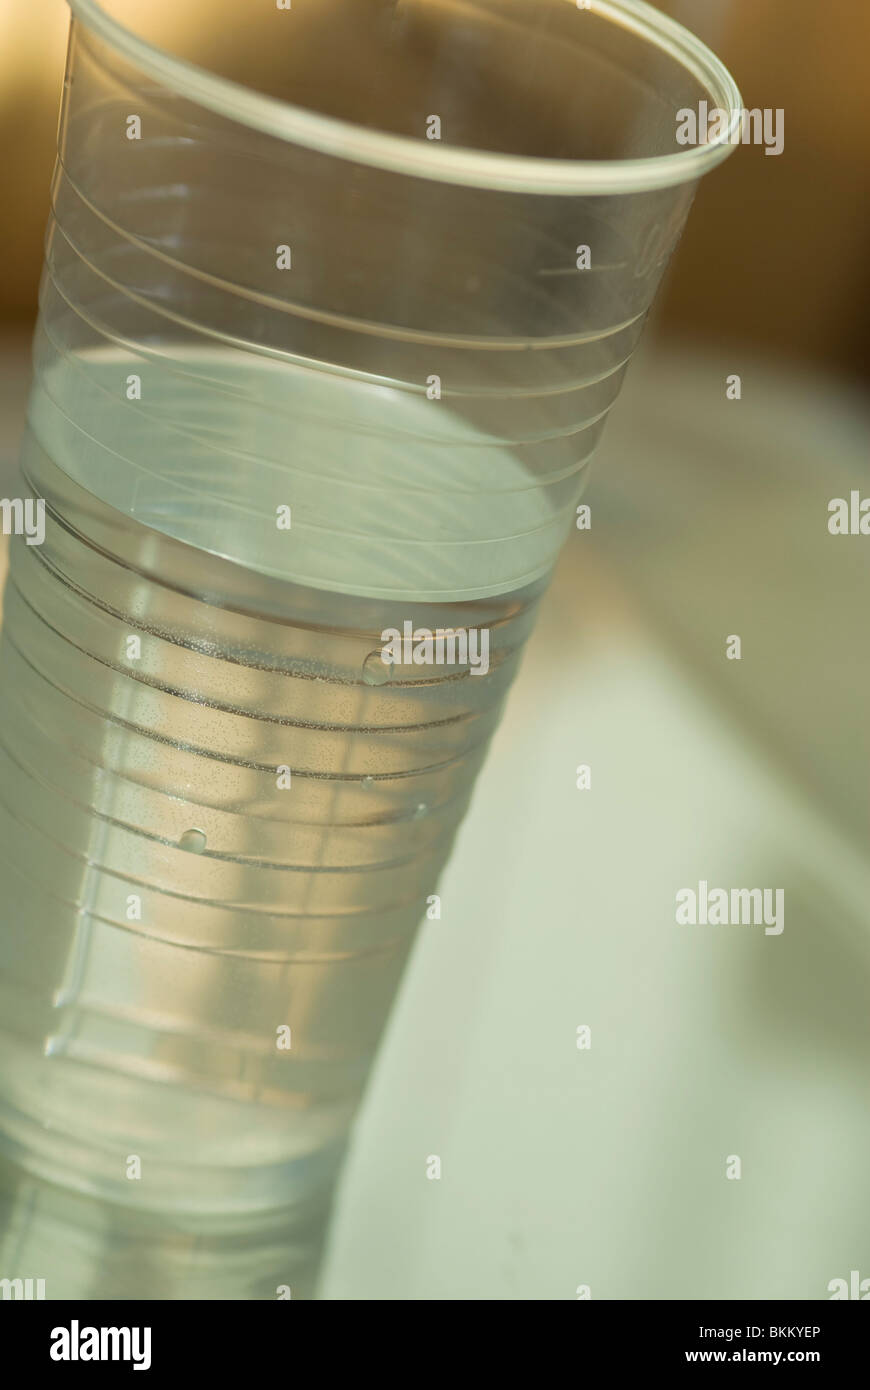 a plastic cup half filled with water set at an angle Stock Photo